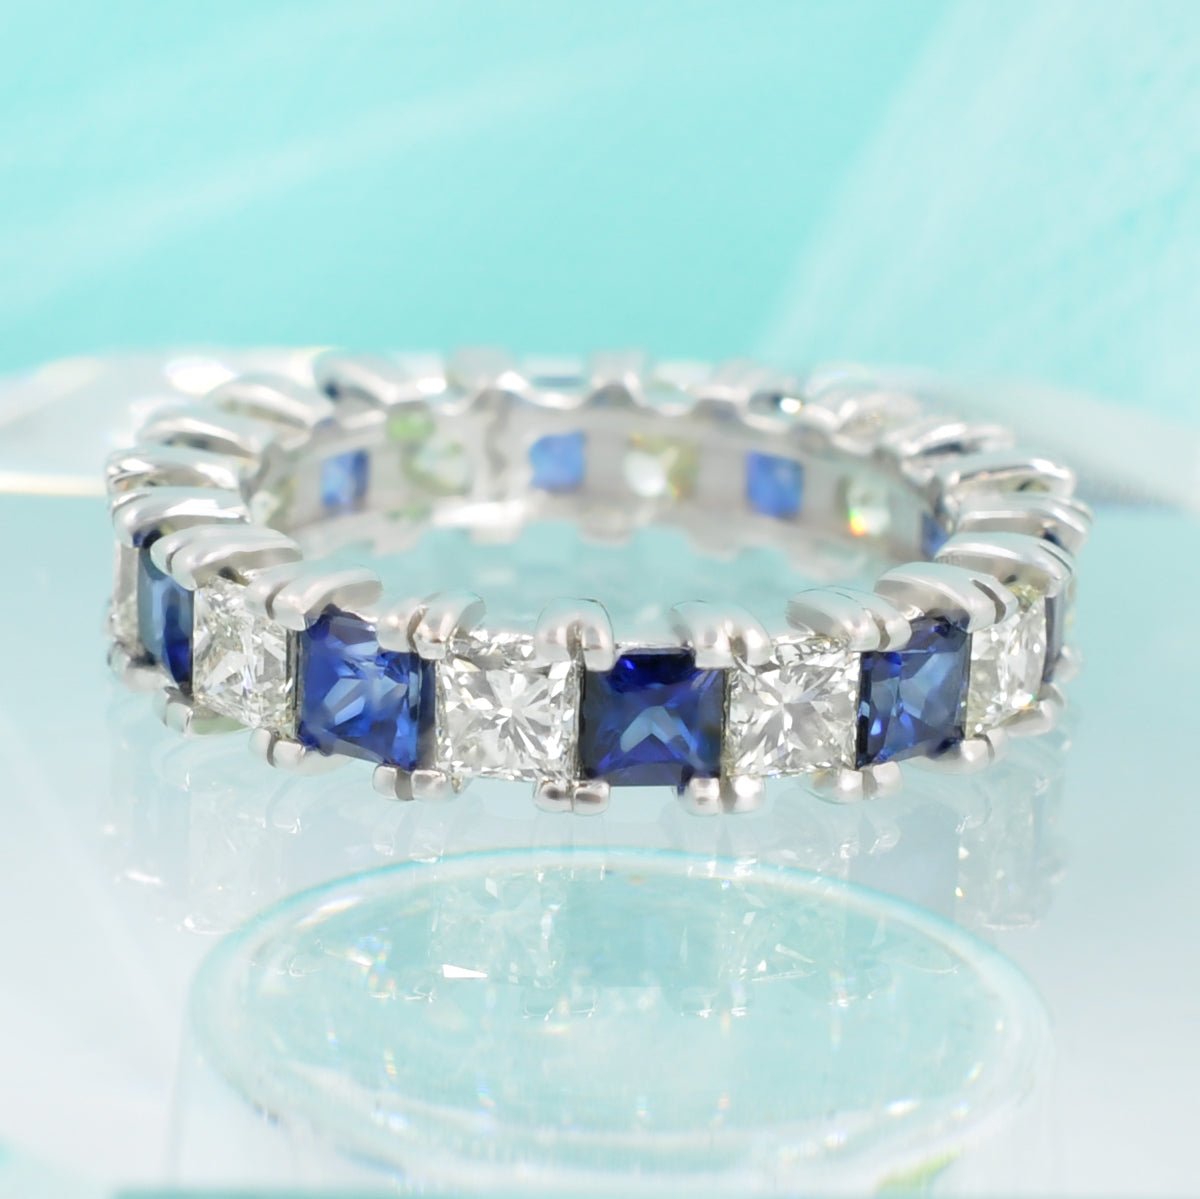 Exquisite 4.70CT Princess cut Diamonds and Blue Sapphires Eternity Ring in 18KT White Gold - Primestyle.com